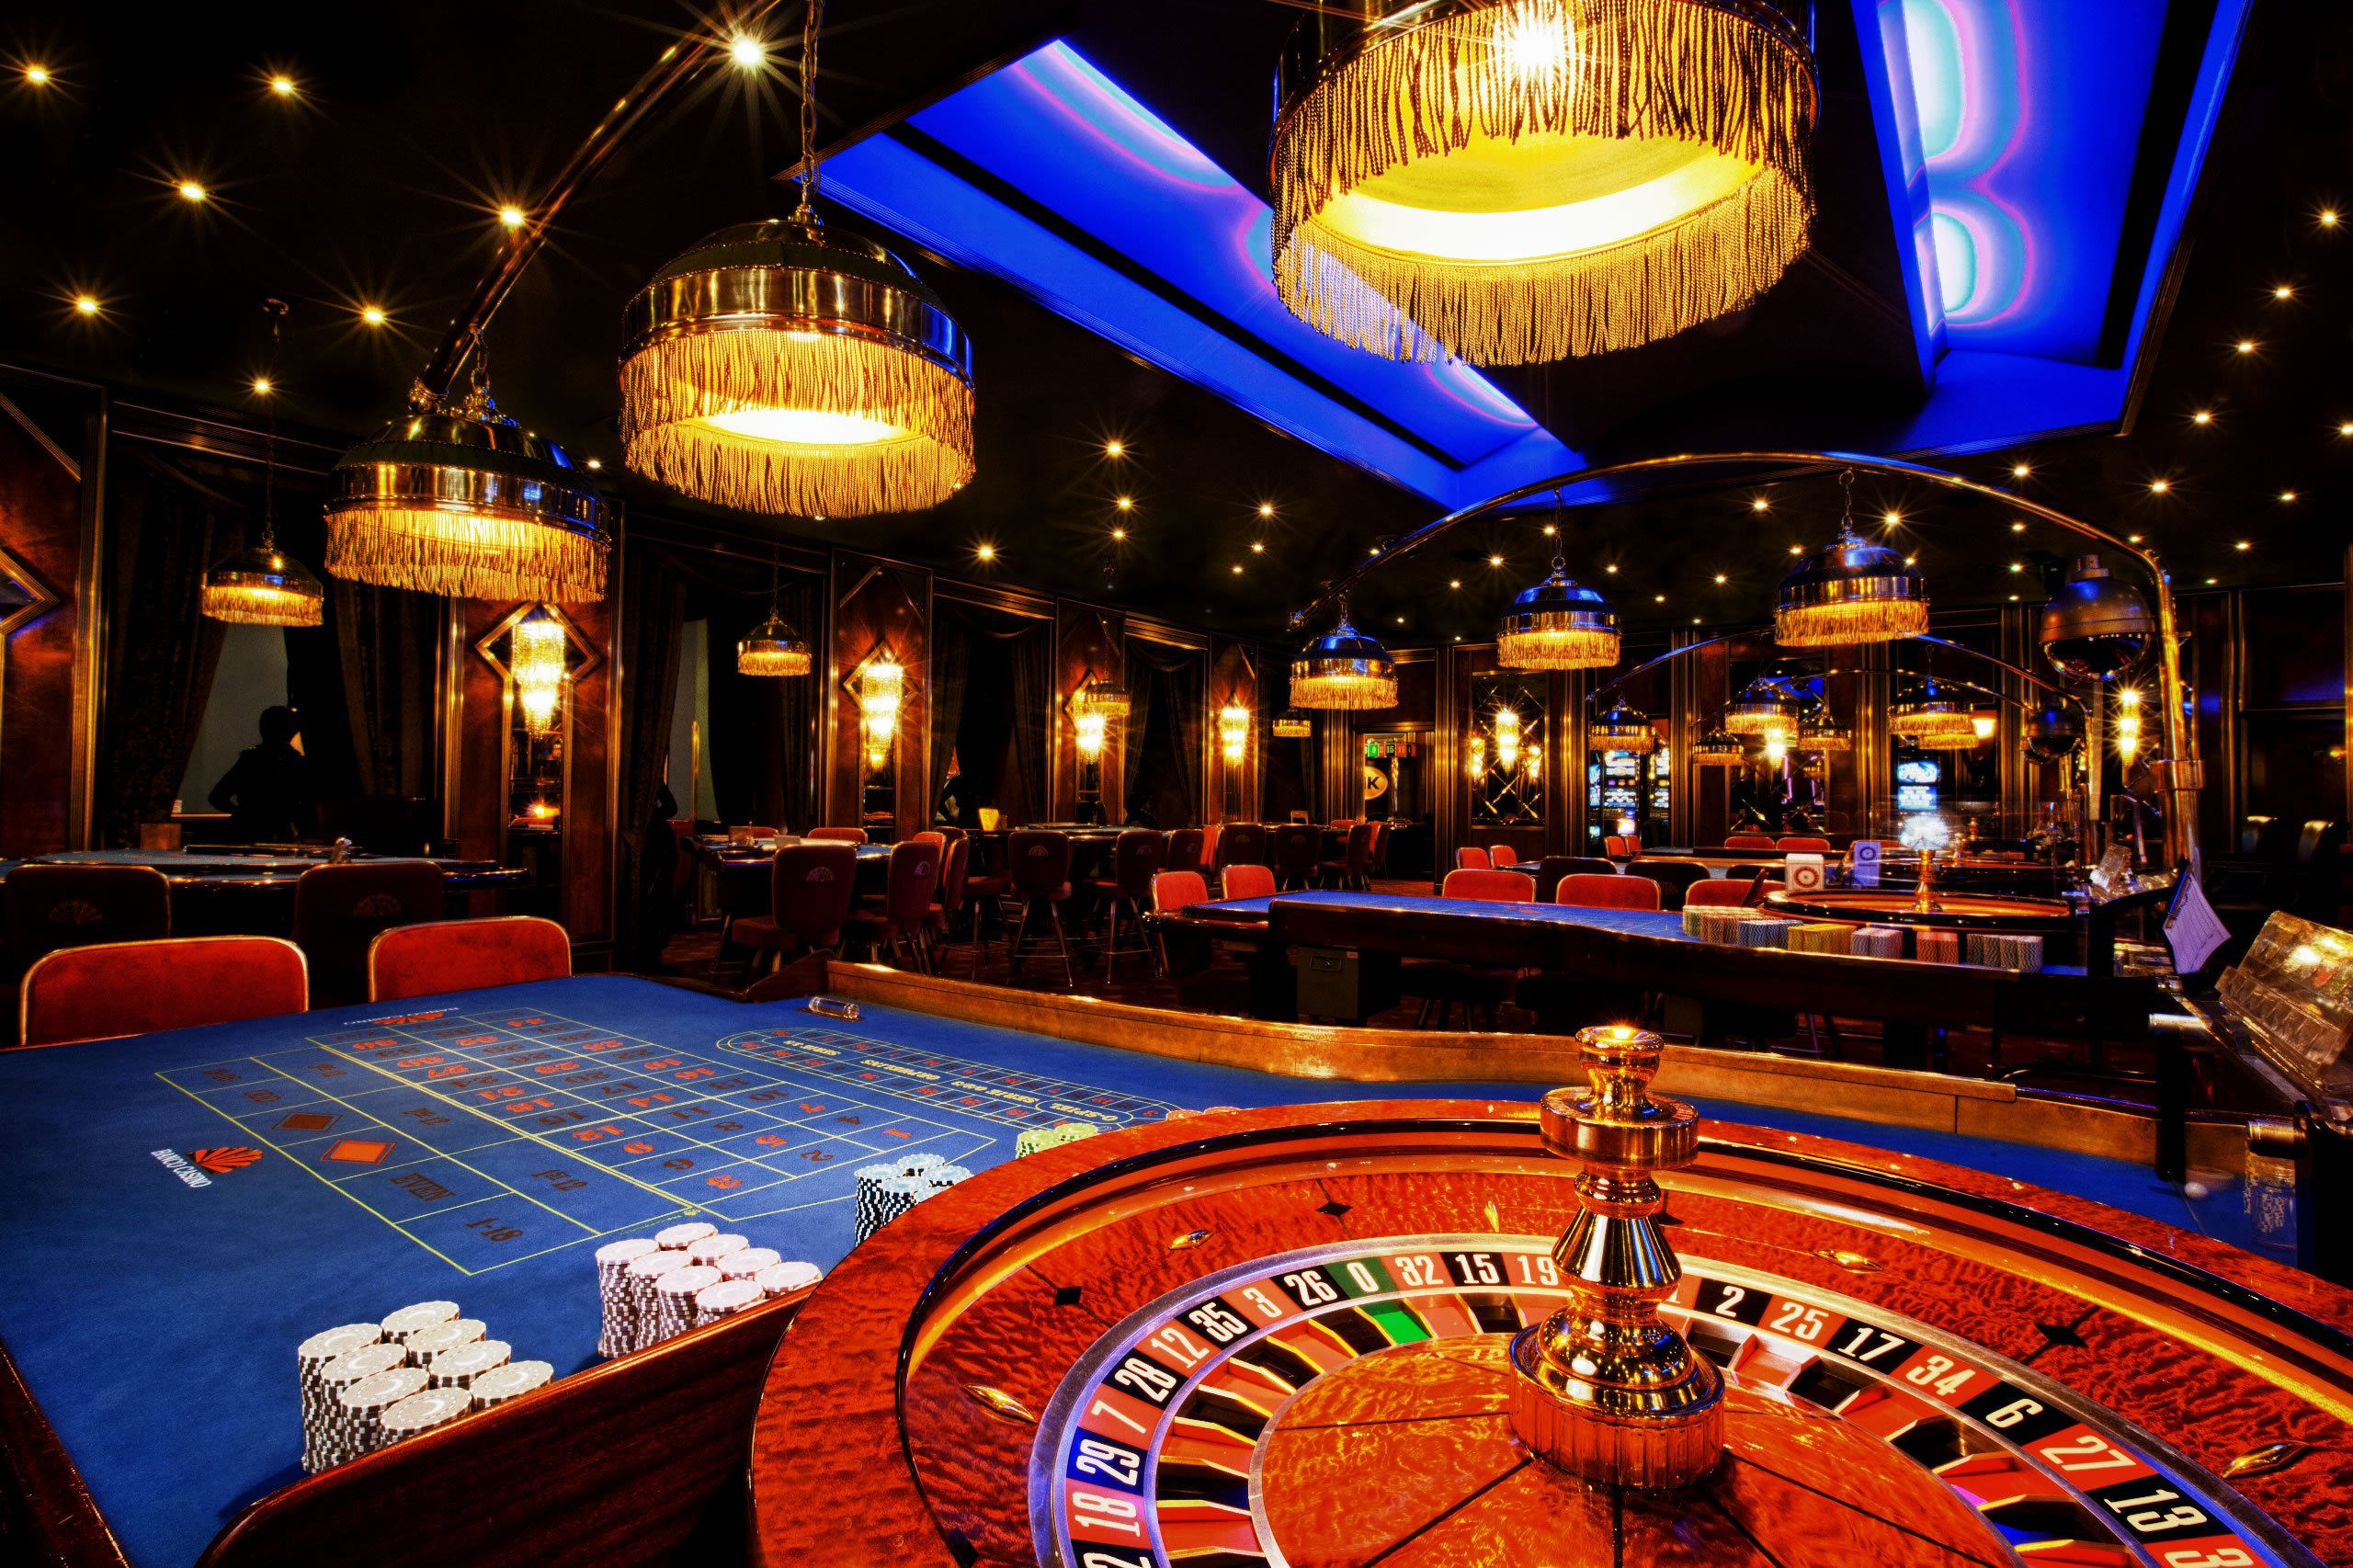 Why should you choose online casino and experience the benefits?